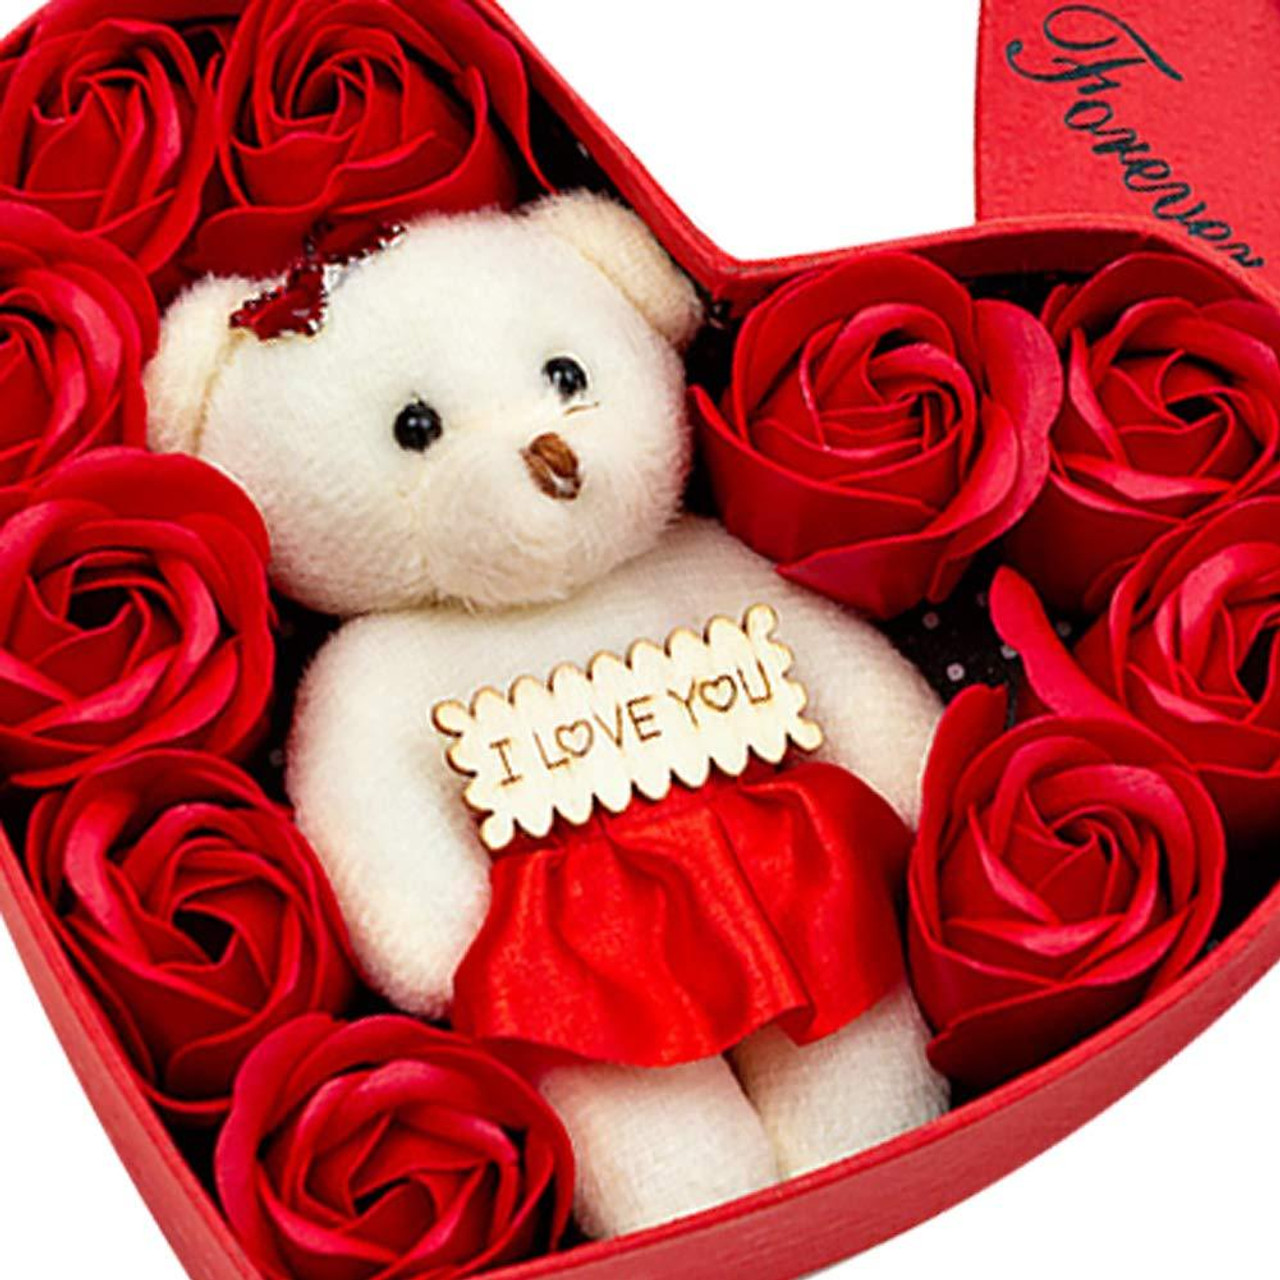 Details about   15.7" Large BigRed Rose W/ Heart Flower Teddy Bear Valentine's Birthday Day Gift 